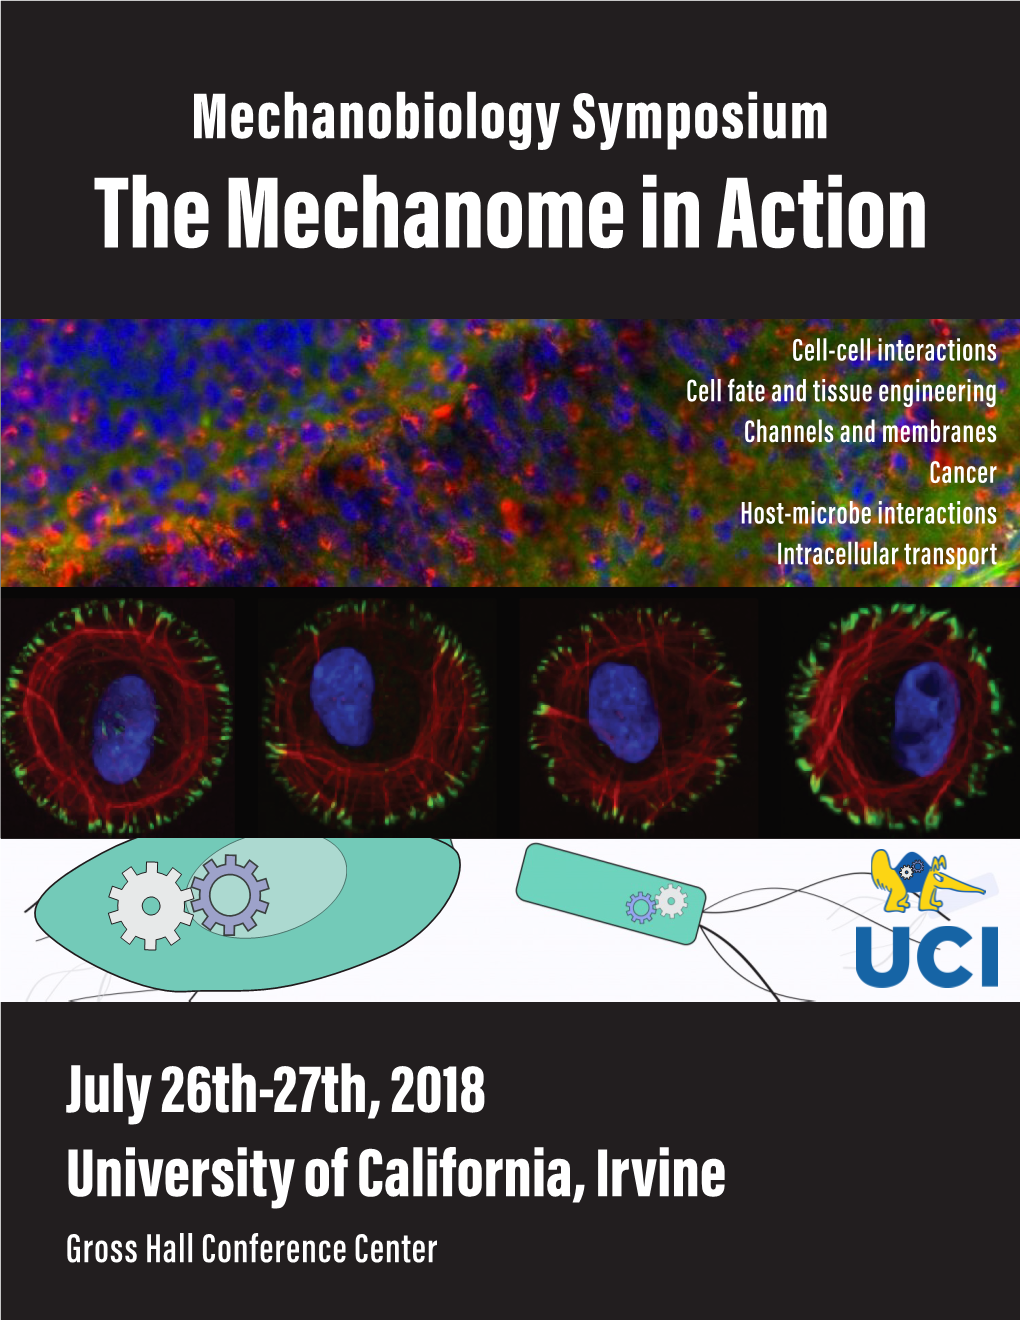 Welcome to the 2018 Mechanobiology Symposium!